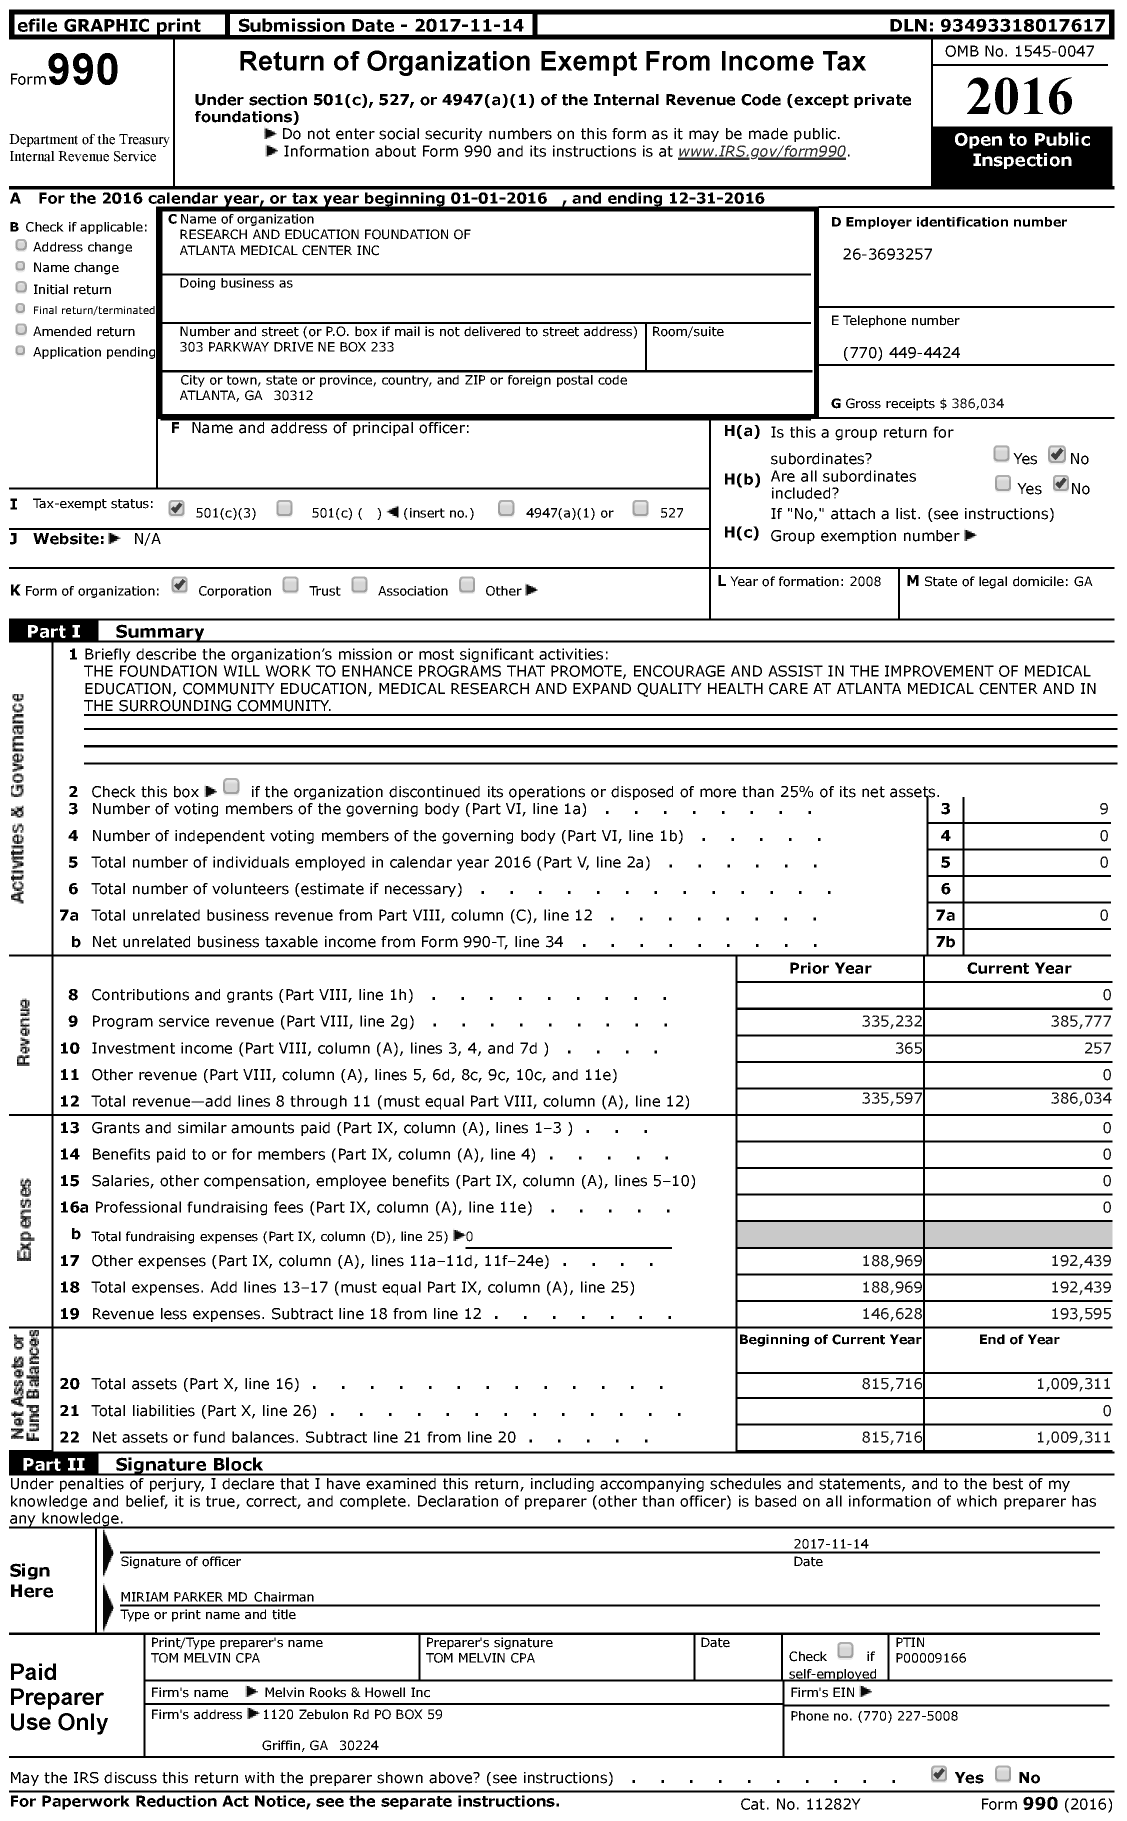 Image of first page of 2016 Form 990 for Research and Education Foundation of Atlanta Medical Center